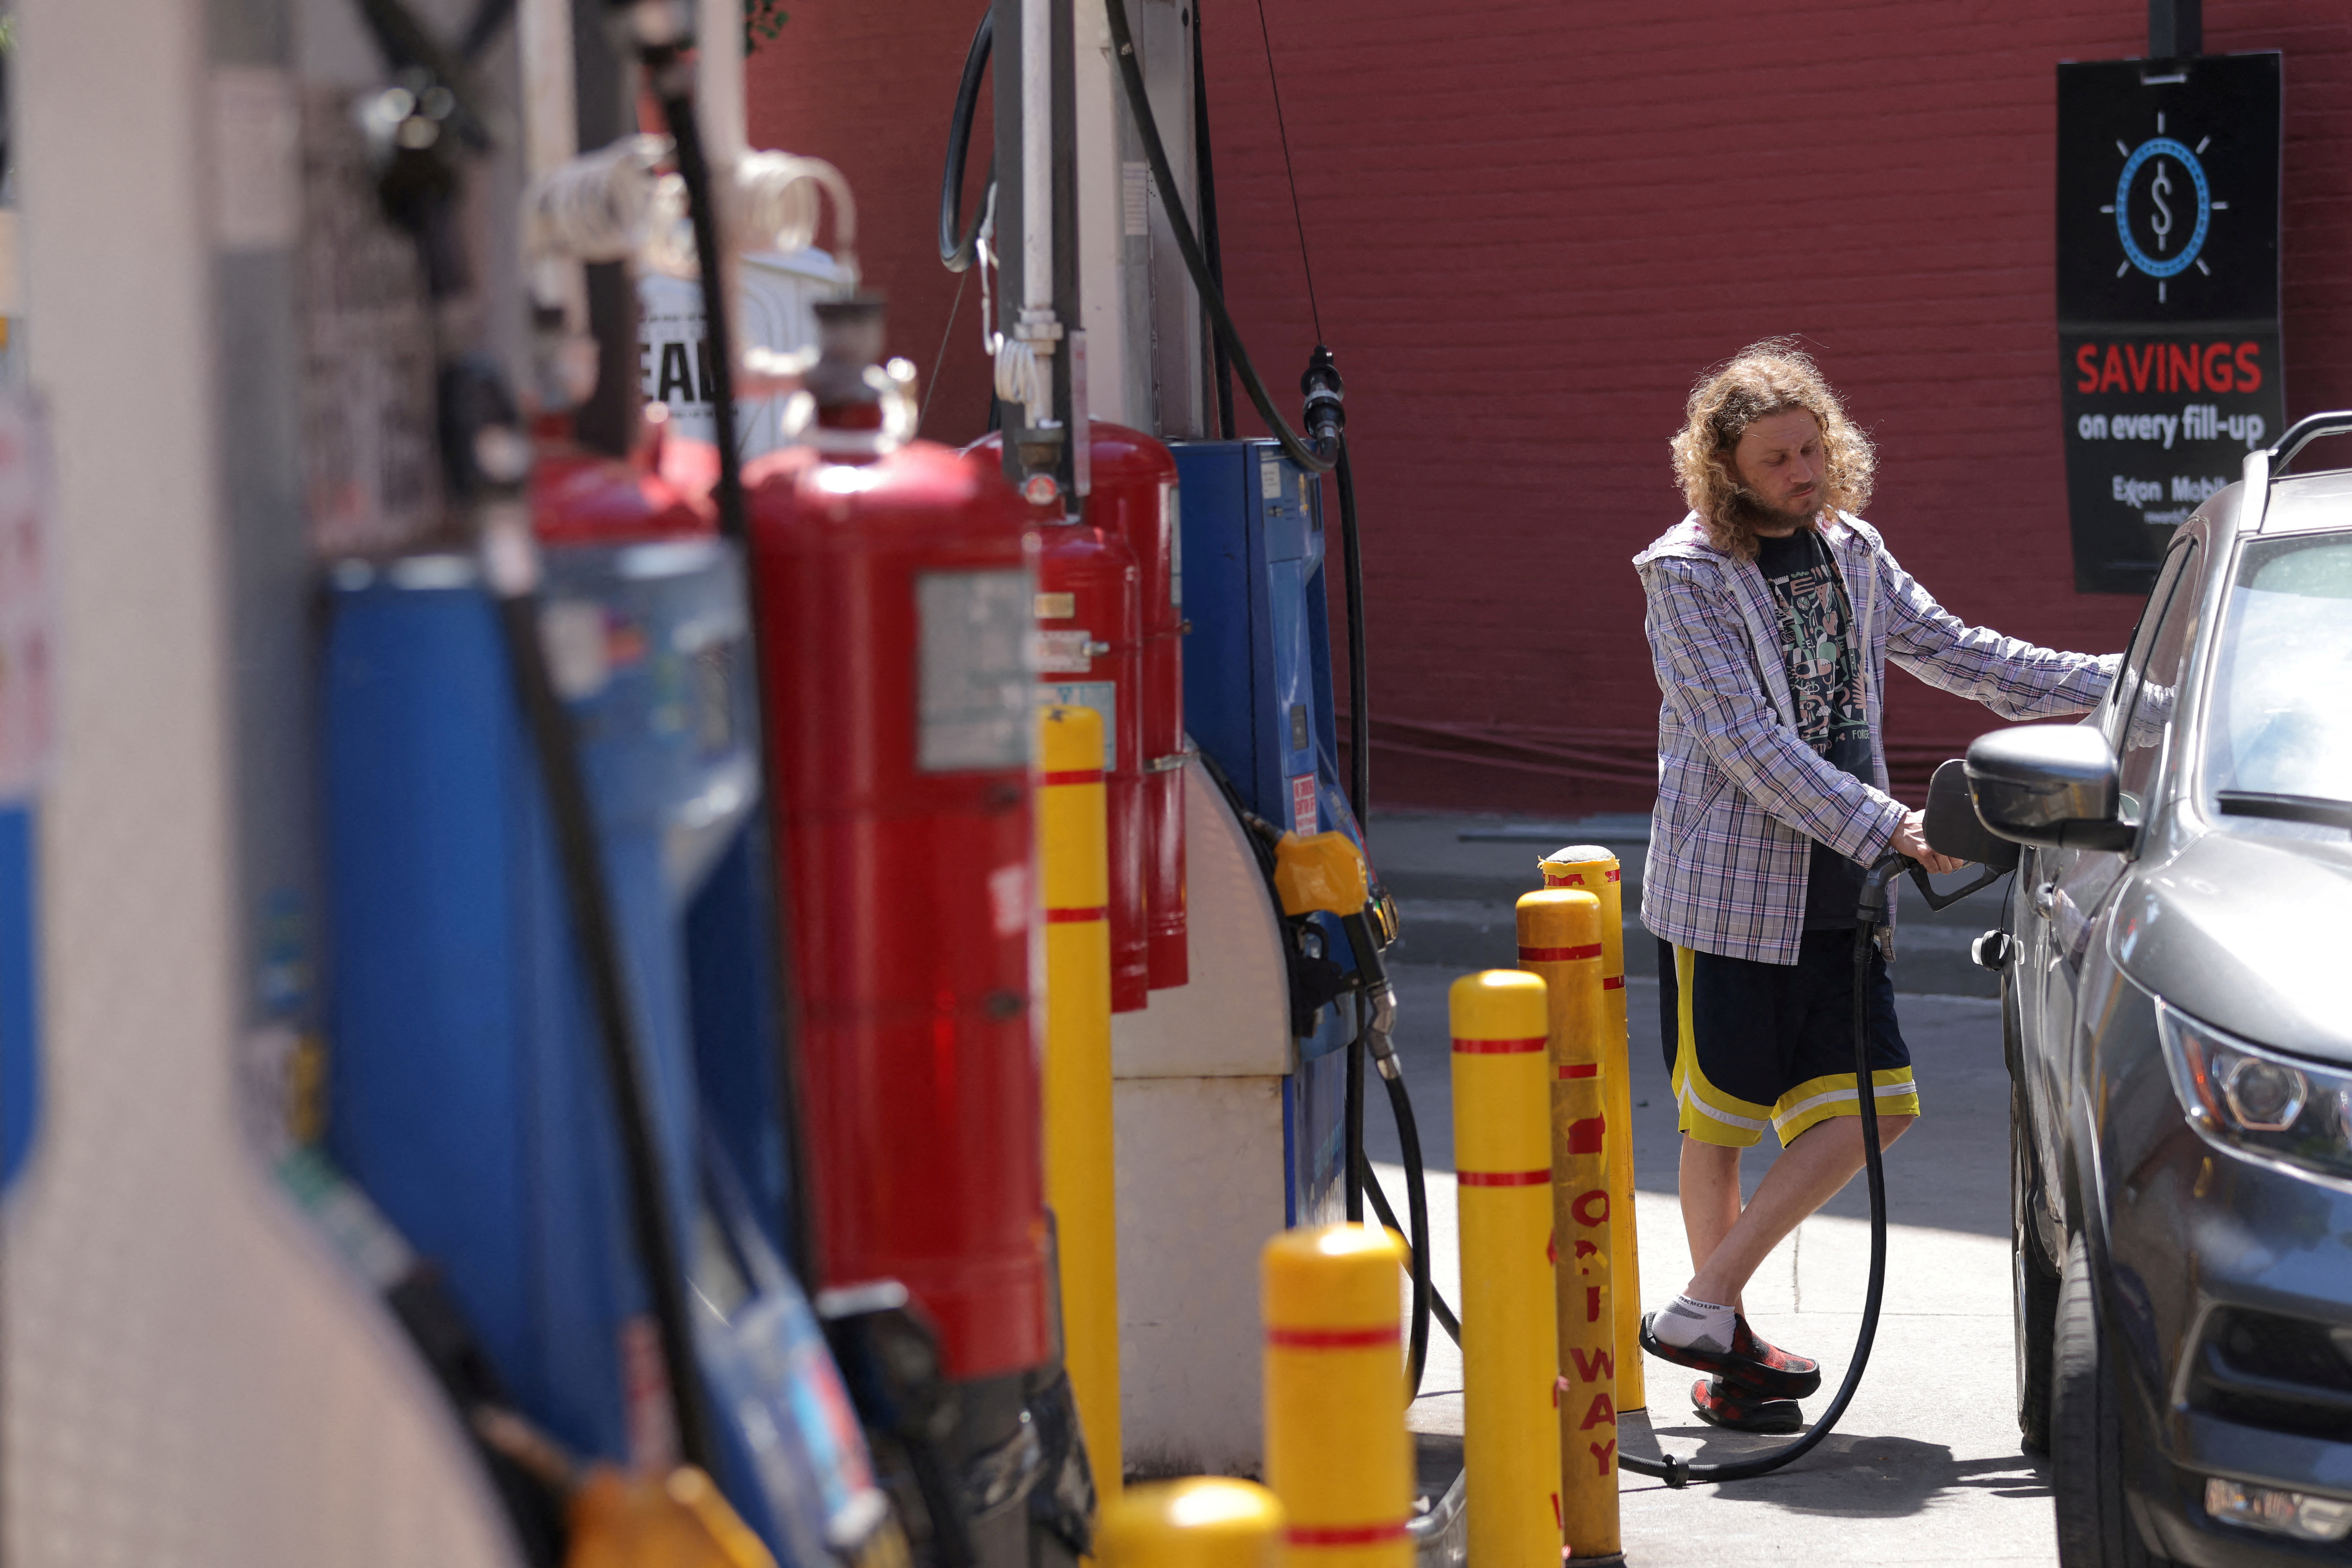 A person puts gas in a vehicle at a gas station in Manhattan, New York City